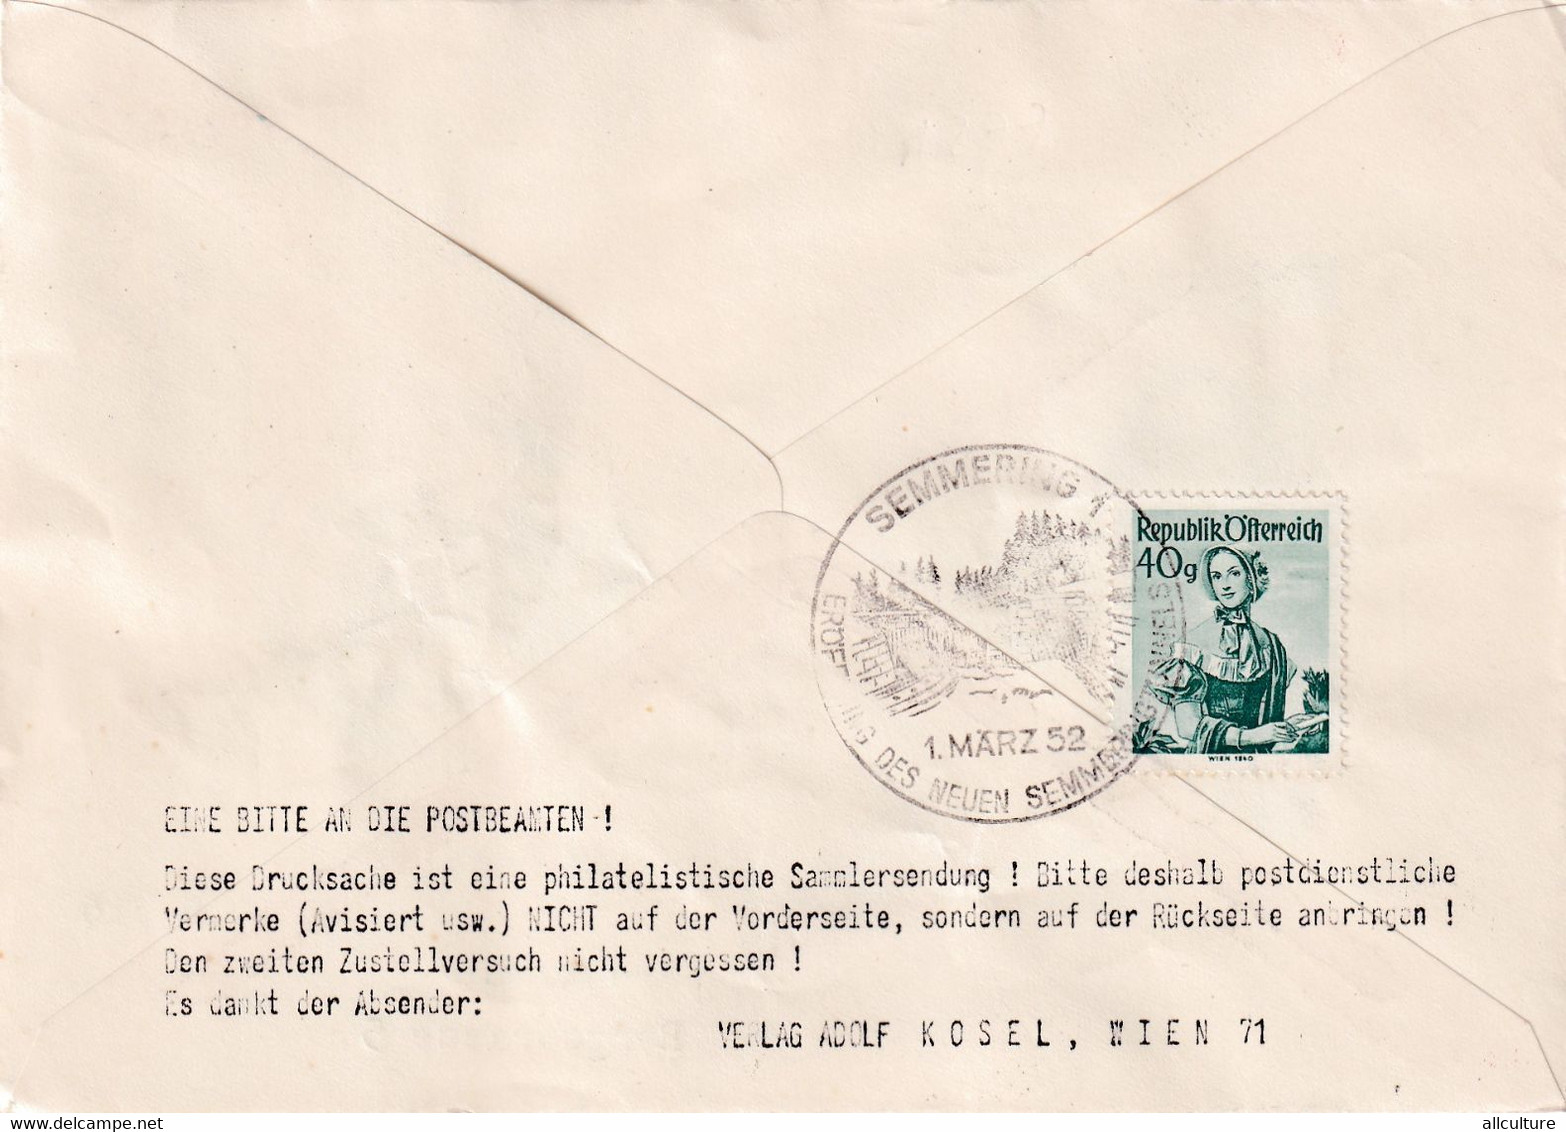 A8381- ERSTTAG,FIRST DAY OF ISSUE REMBOURSEMENT DRUCKESACHEL PHYLATELIST 1952 REPUBLIC OSTERREICH USED STAMP ON COVER - FDC